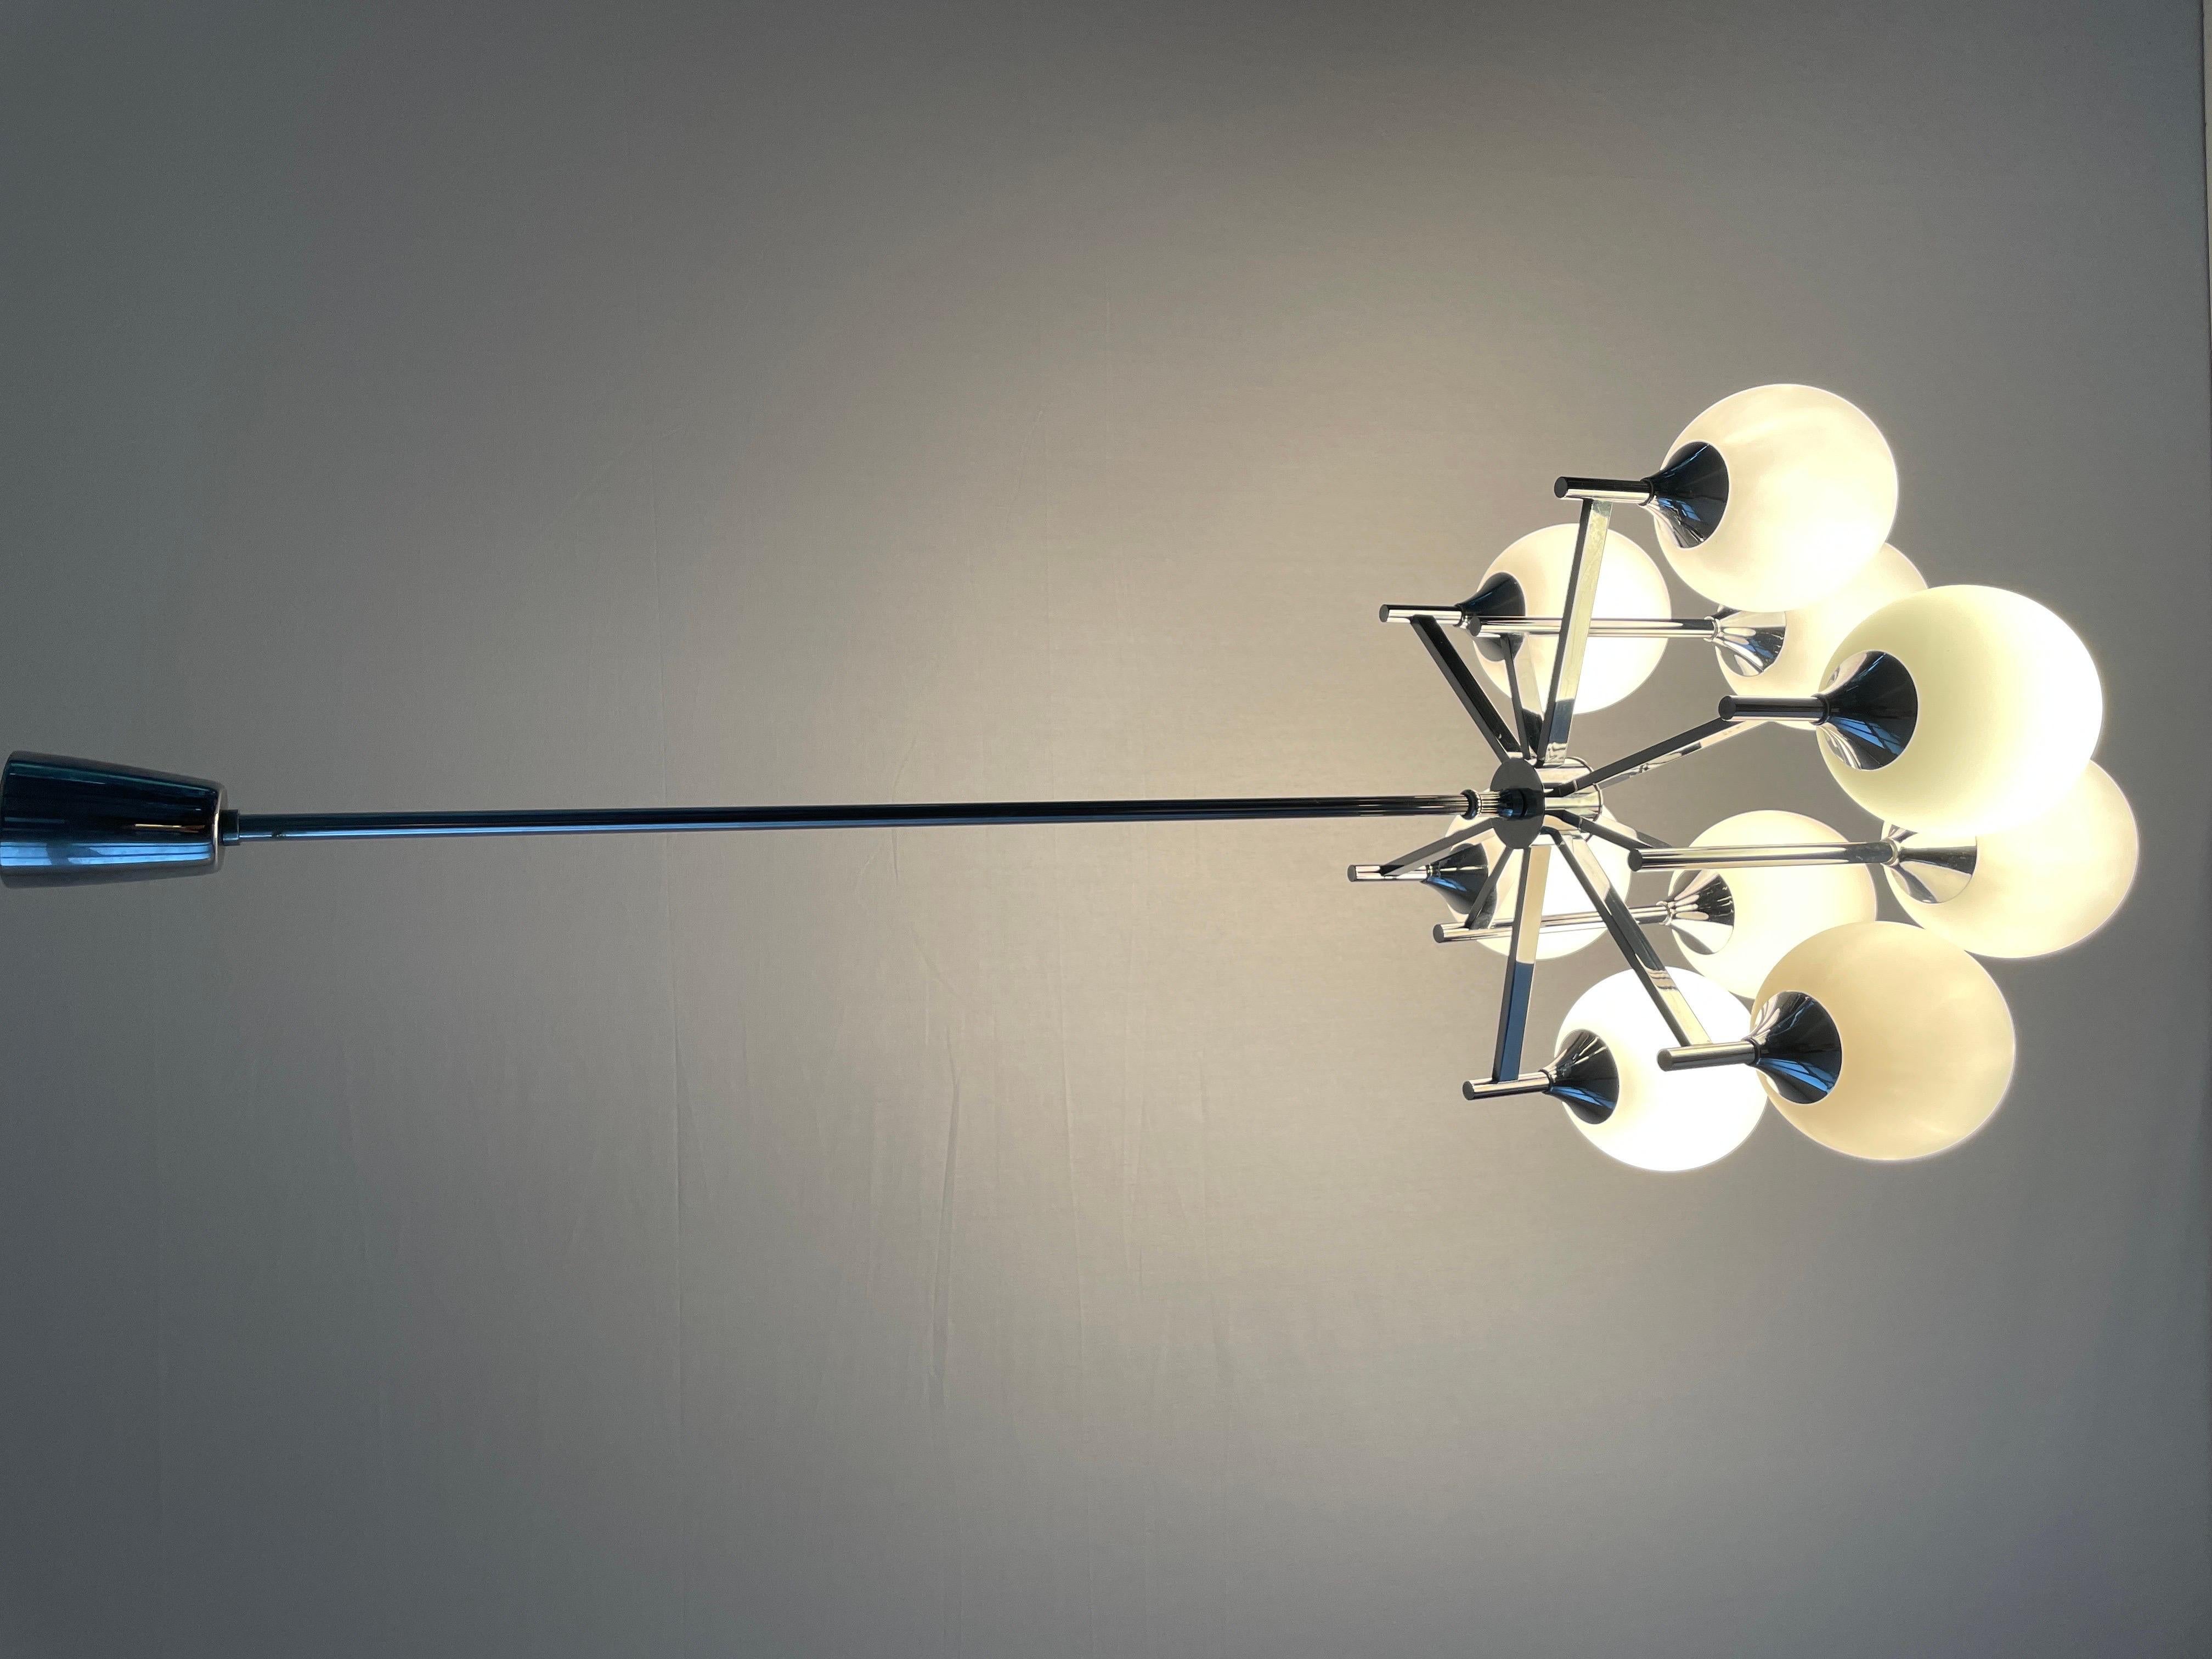 9 White Ball Glass and Chrome Body Chandelier by Kaiser Leuchten, 1960s, Germany For Sale 11